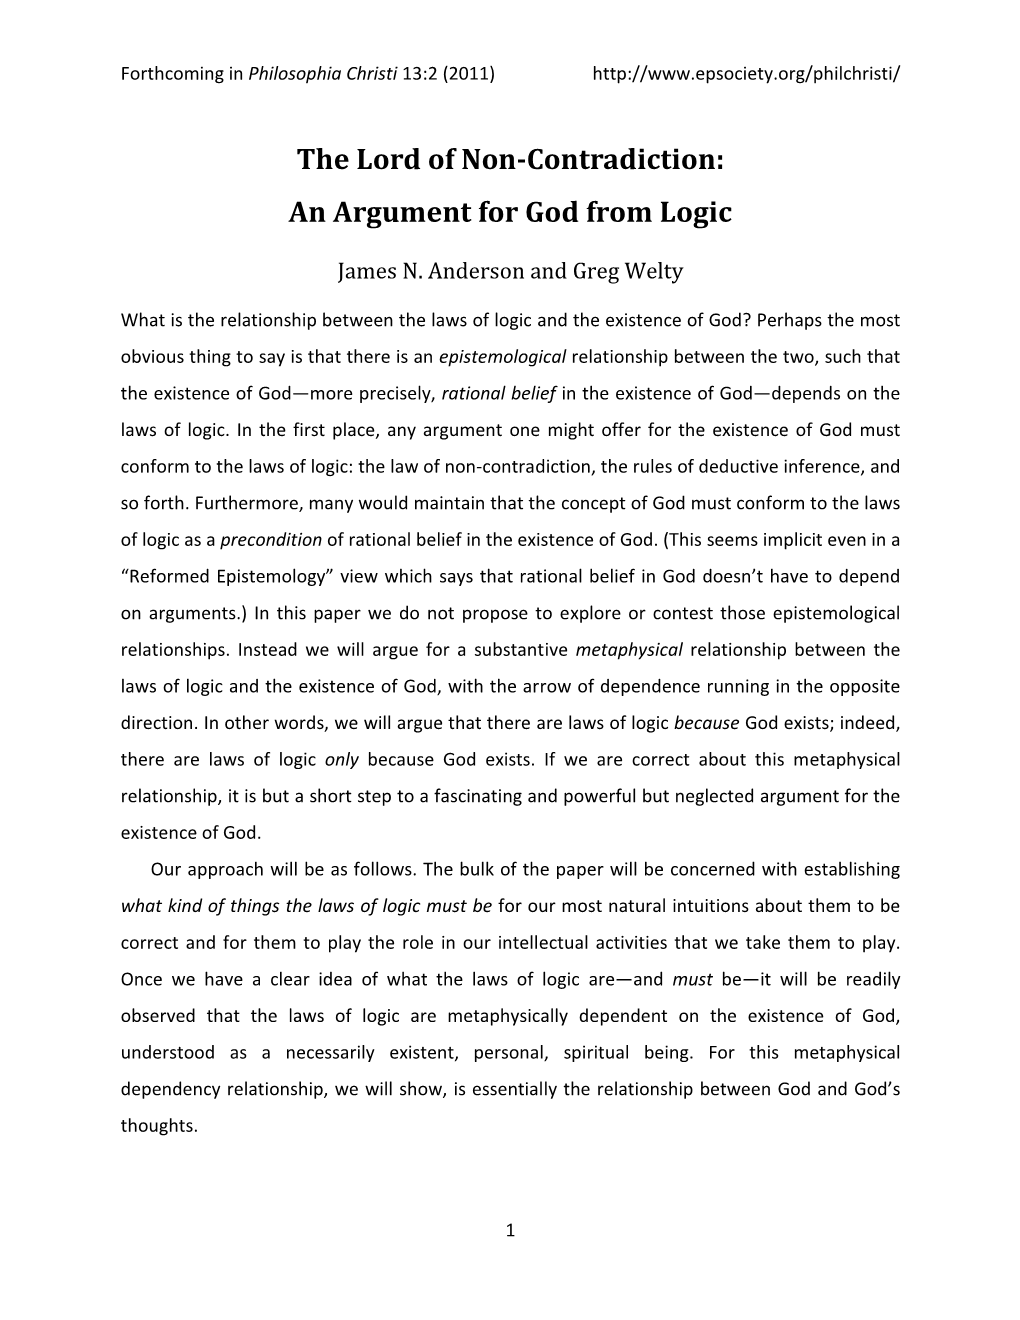 The Lord of Non-Contradiction: an Argument for God from Logic